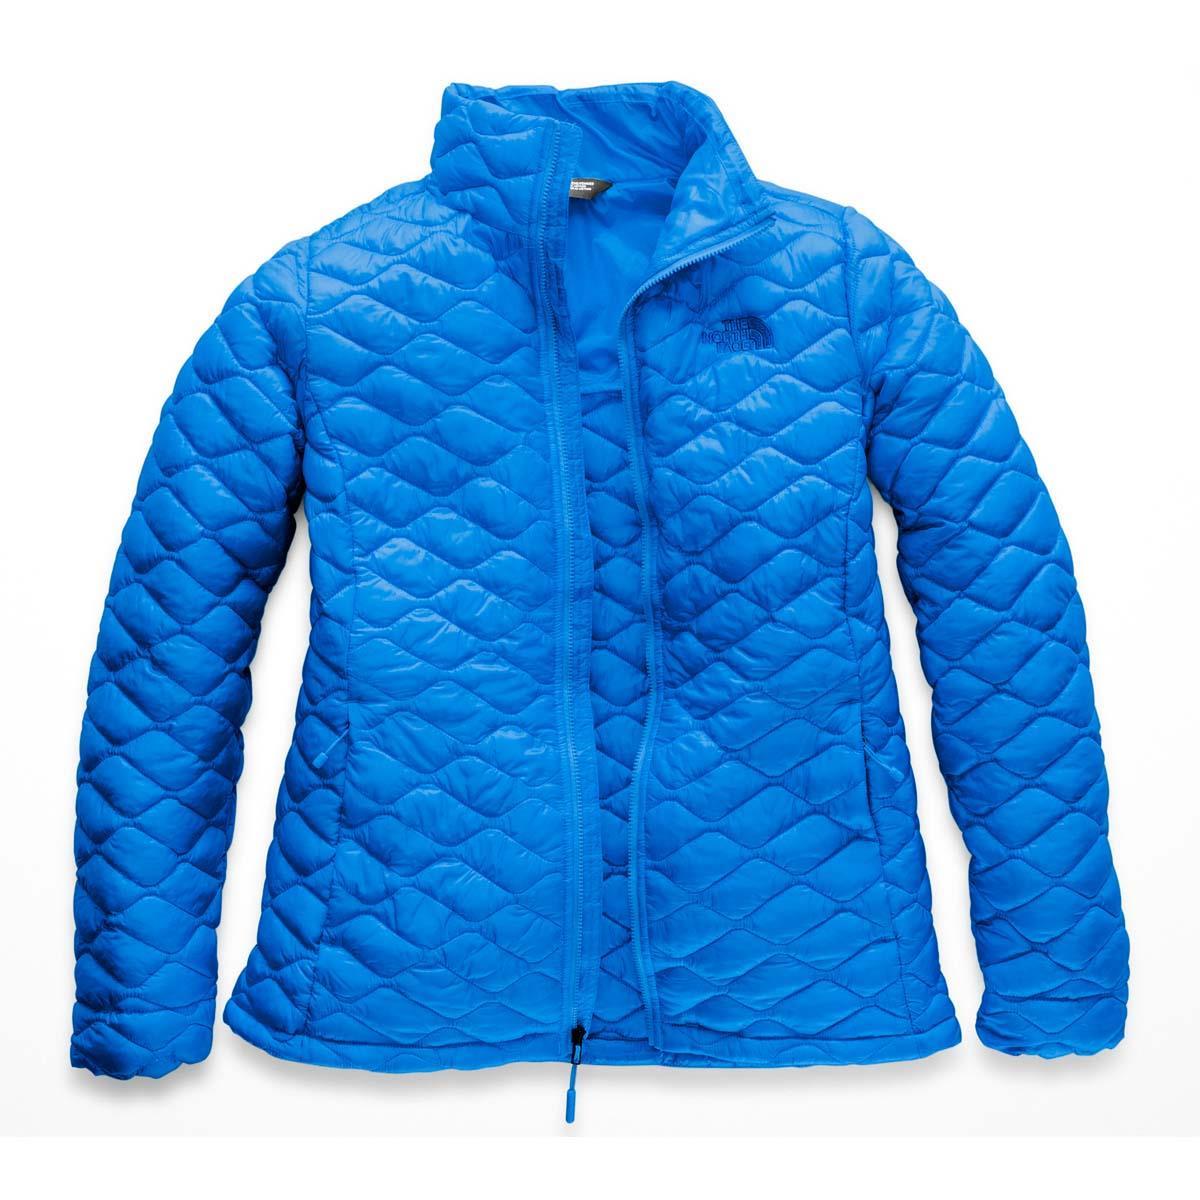 North Face Women's Thermoball Jacket 